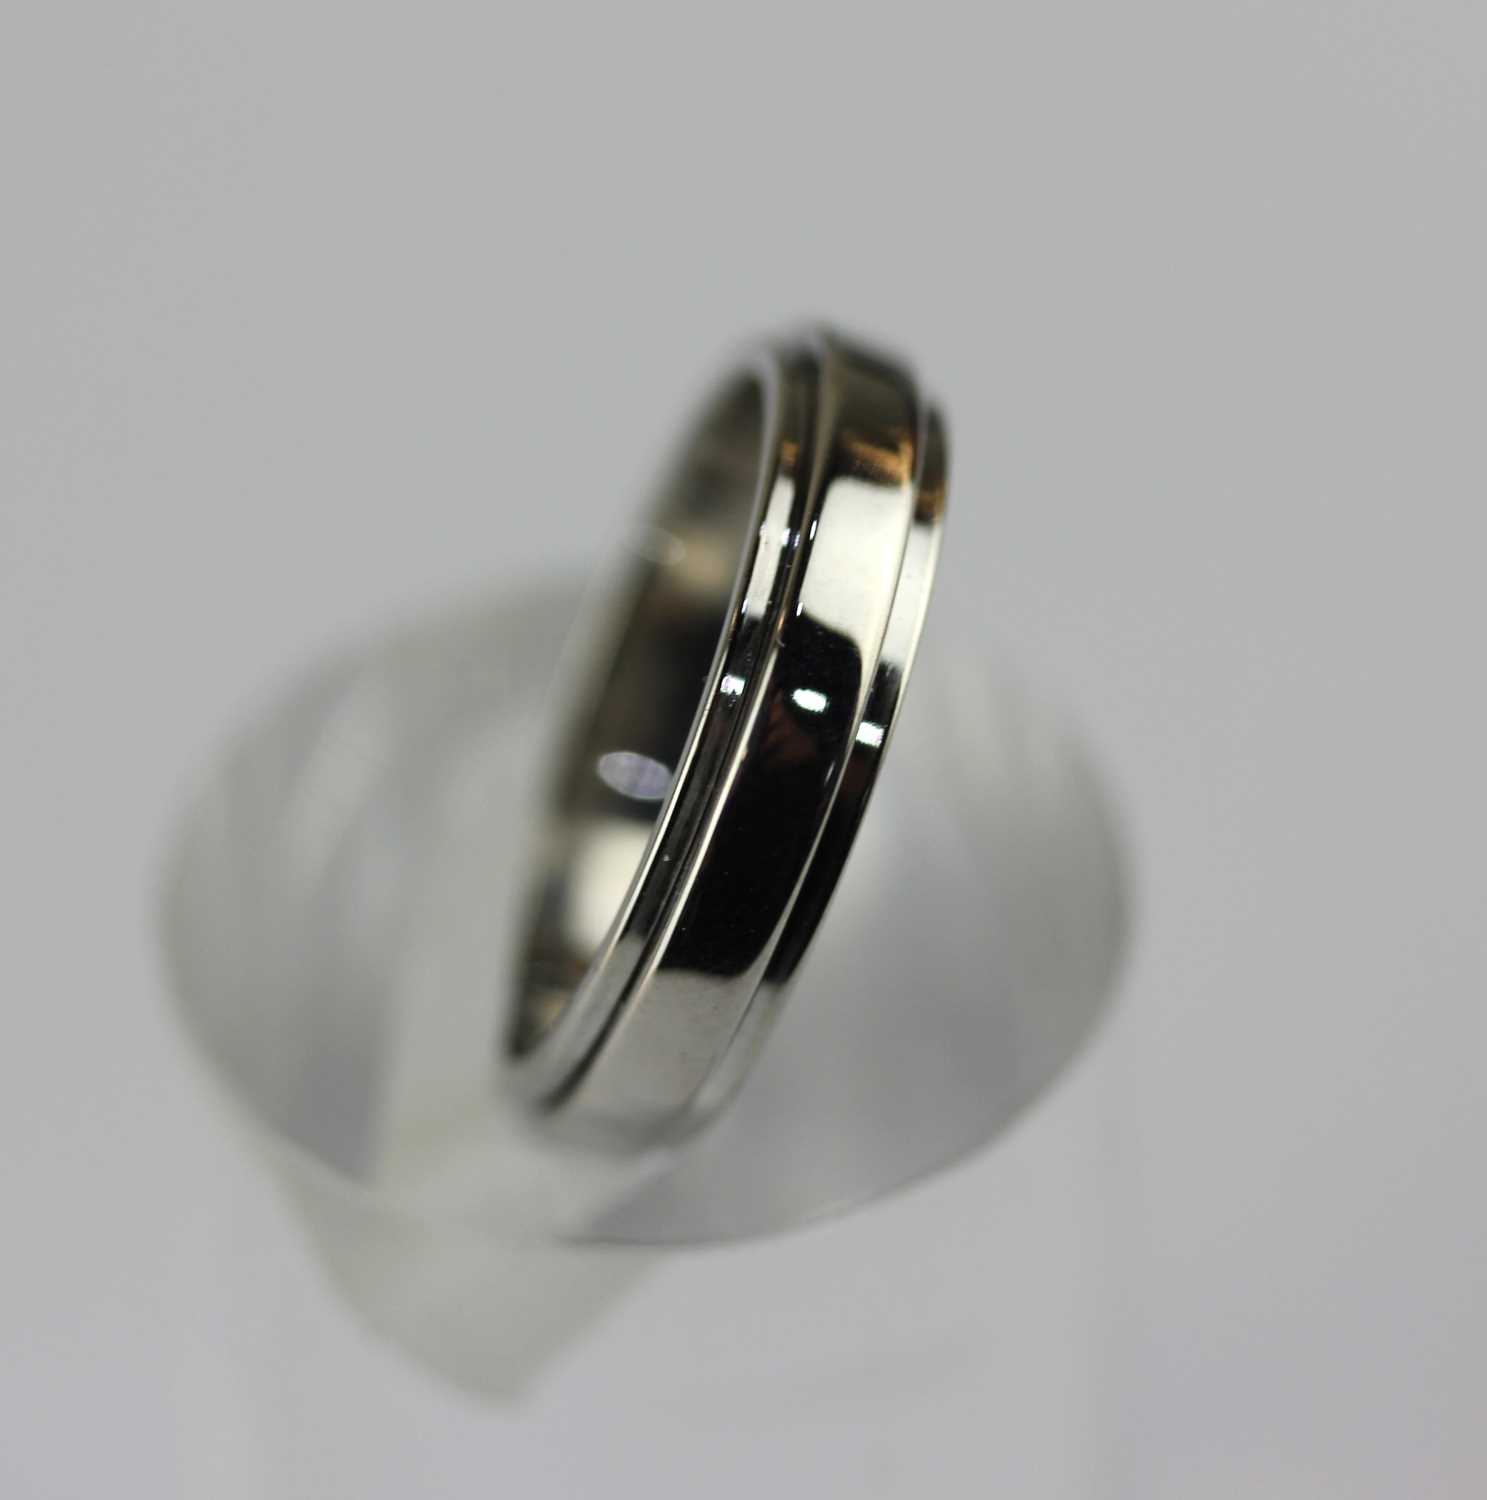 A Piaget 18ct white gold 'Possession' wedding band ring, detailed '750 D50476 57', ring size P, 6.